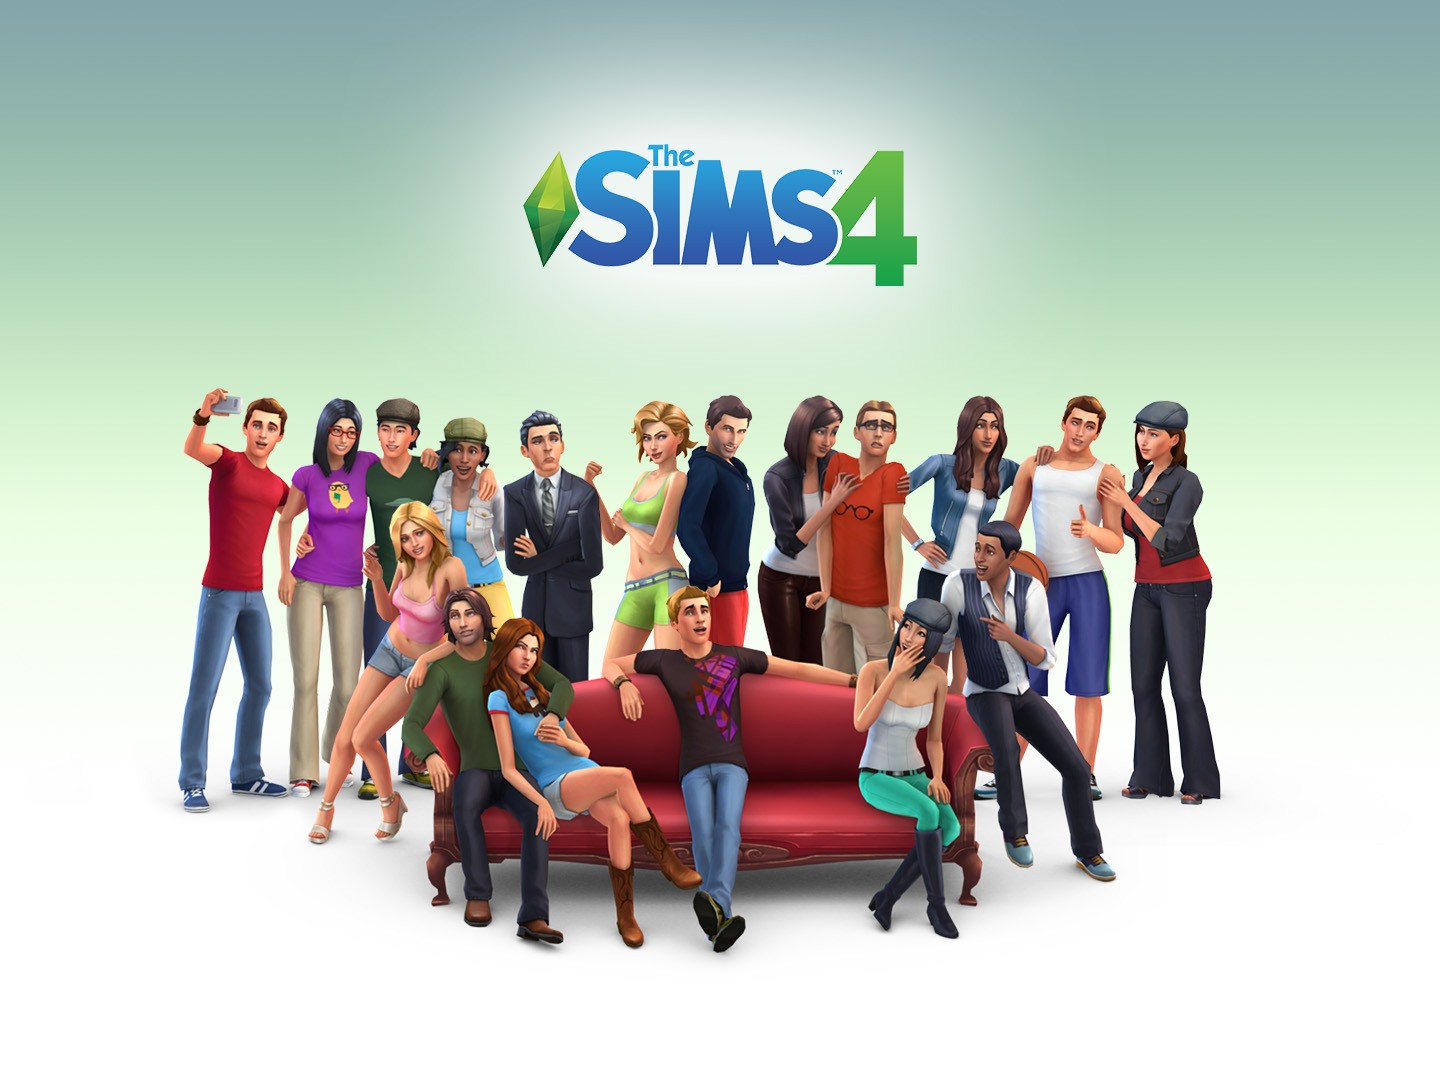 The-Sims-4-Game-Wallpaper